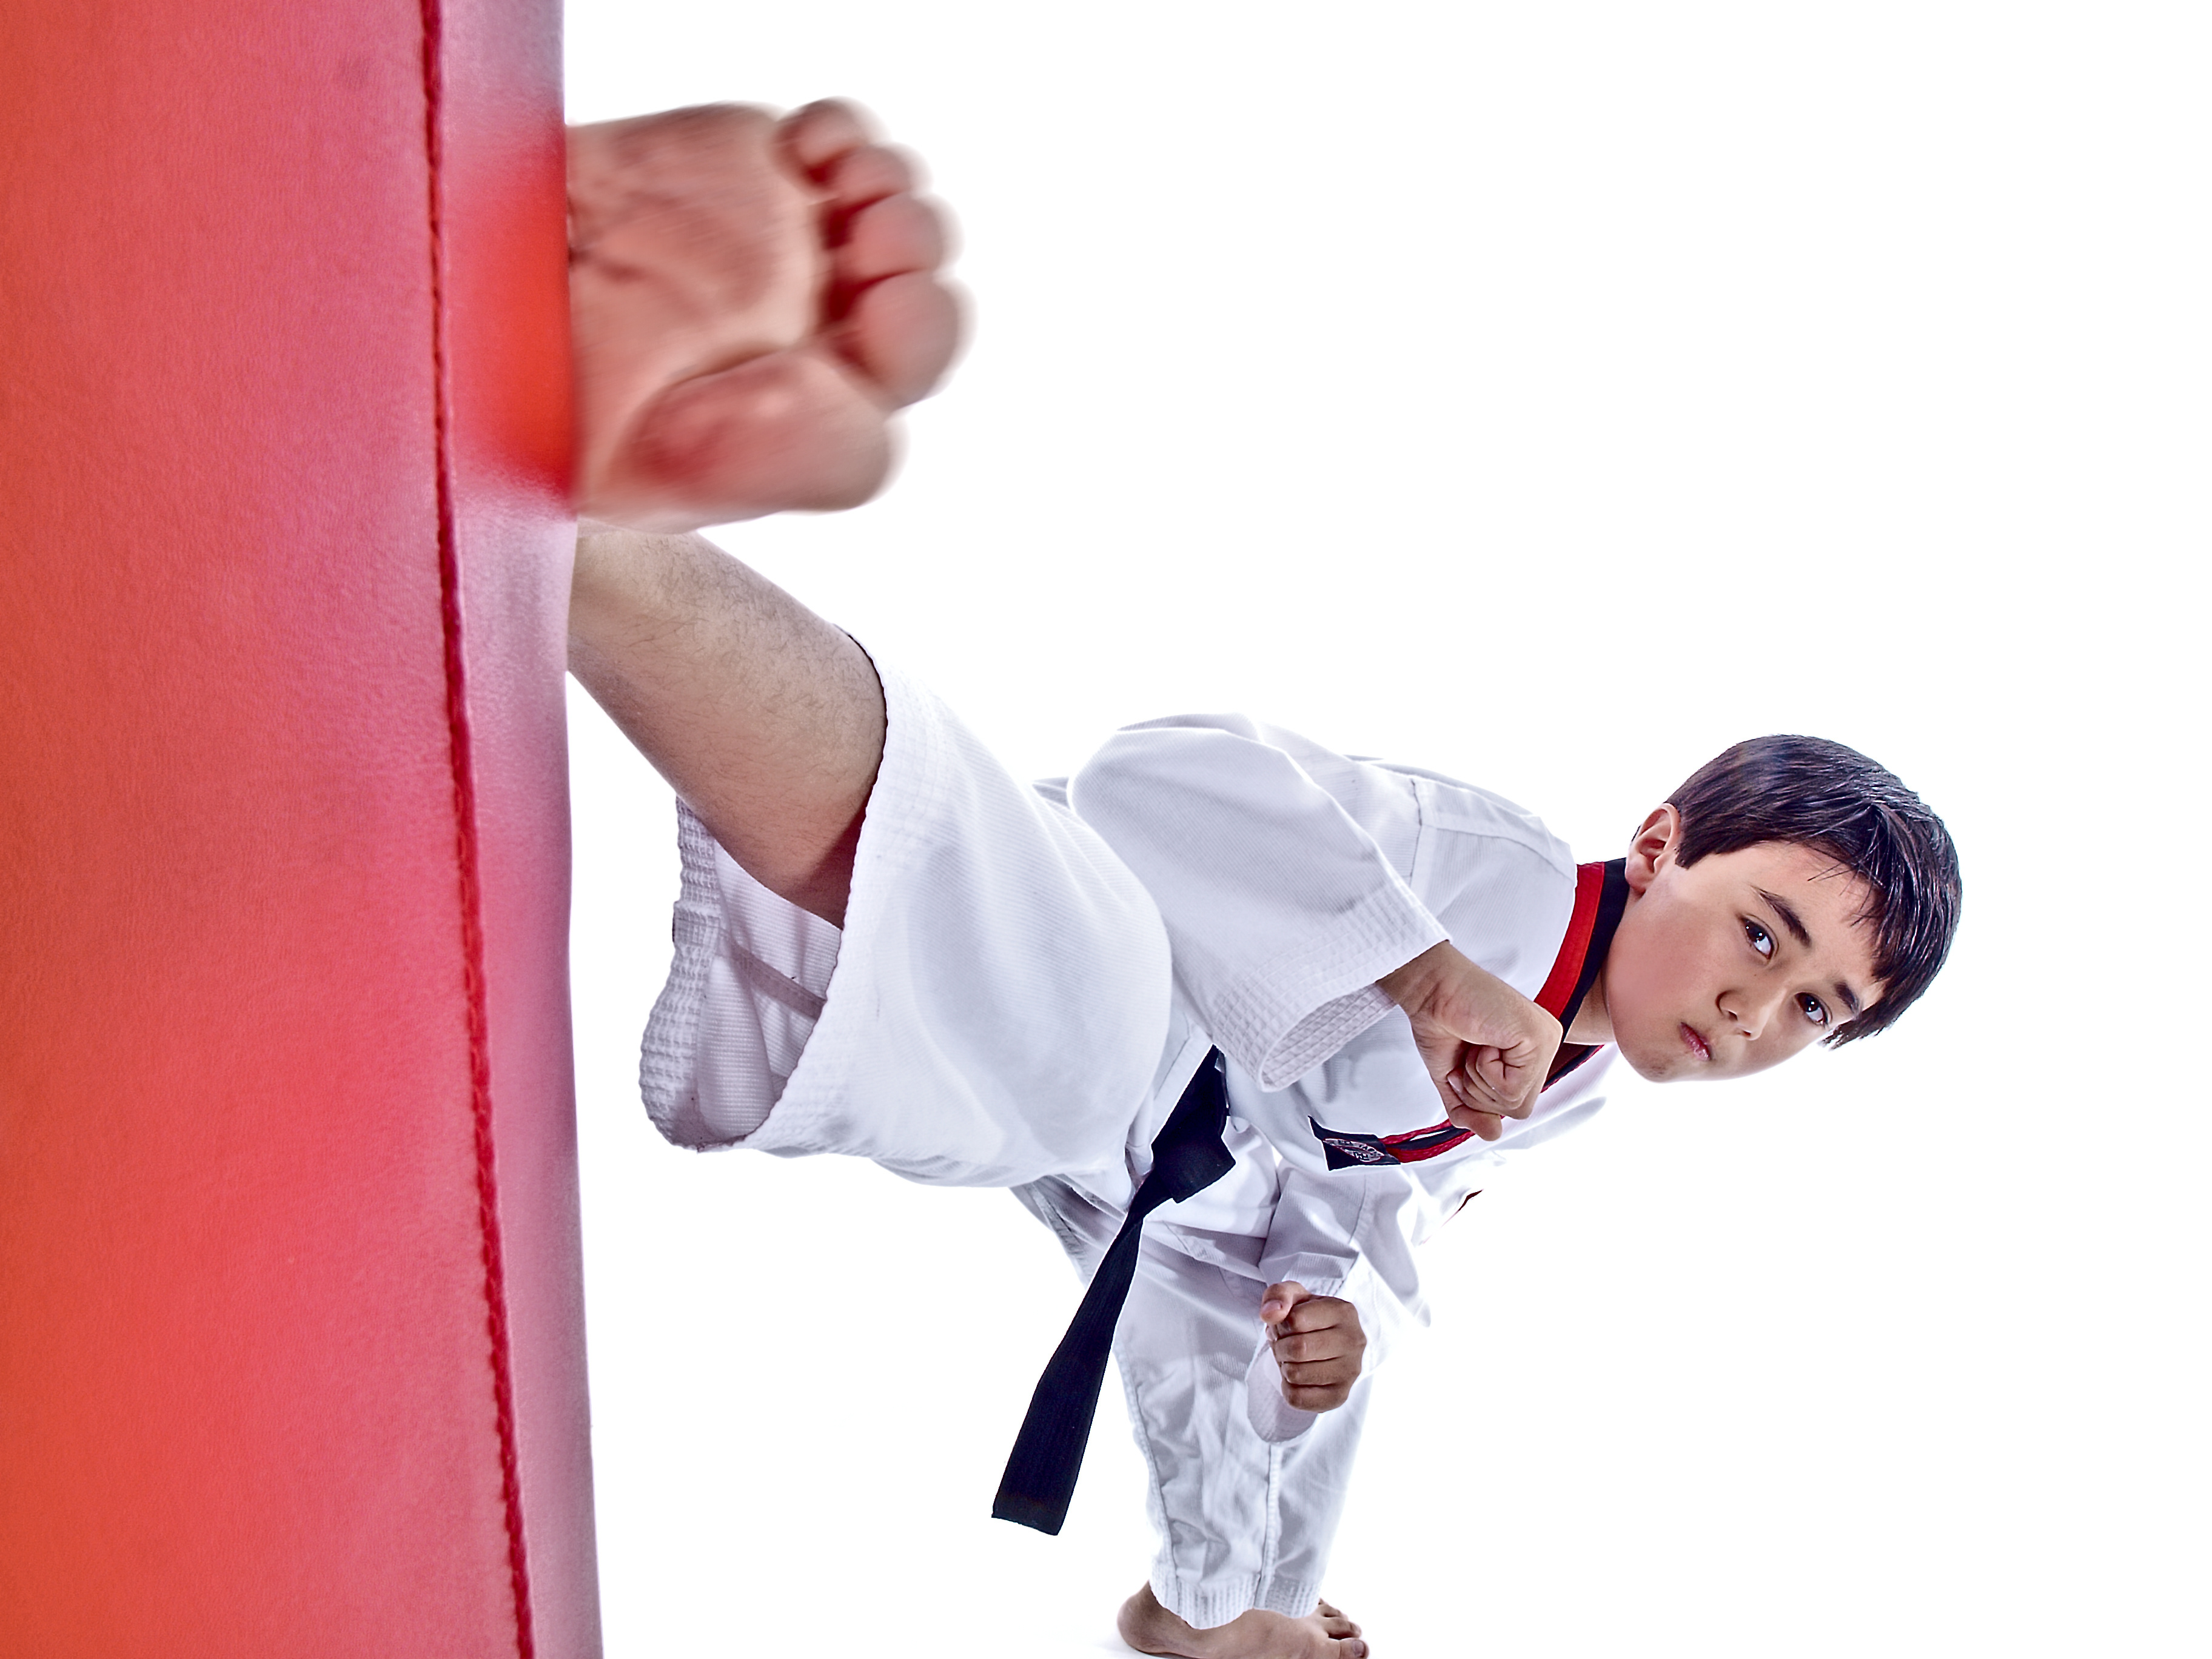 Kids' Martial Arts and Karate Classes: A Parent's Guide